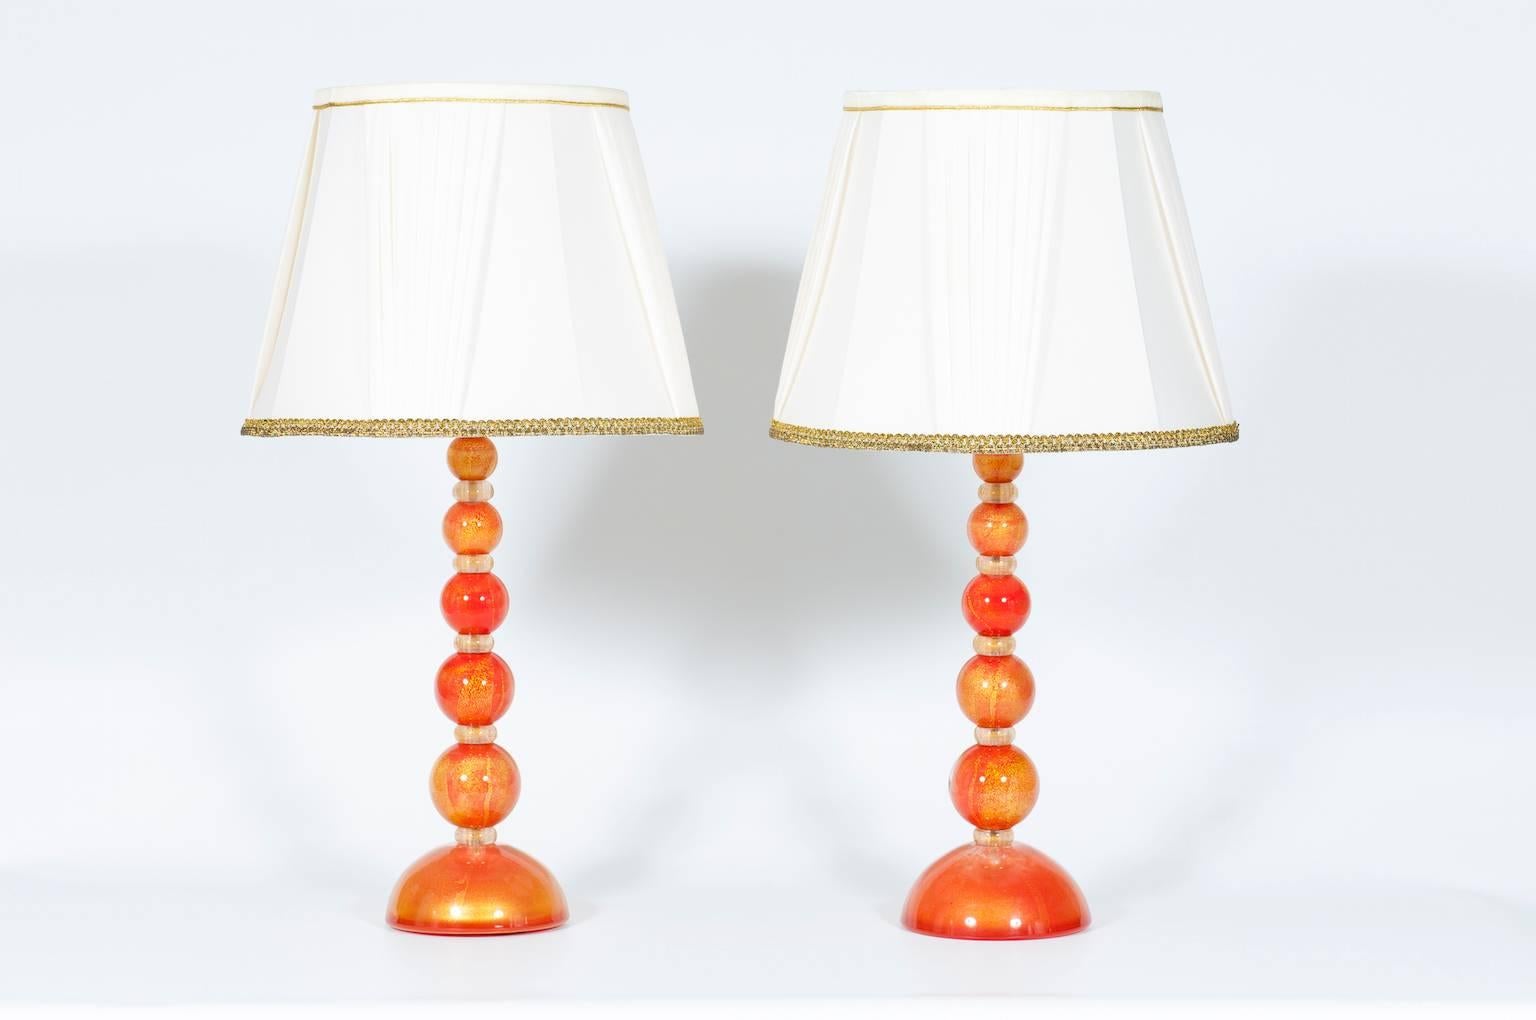 Pair of very particular Italian Venetian Murano glass table lamps in gold and orange, in very excellent original condition from 2016, having a base and a spheres in orange and gold with between them a gold washers. The table lamps measure 21.46 inch